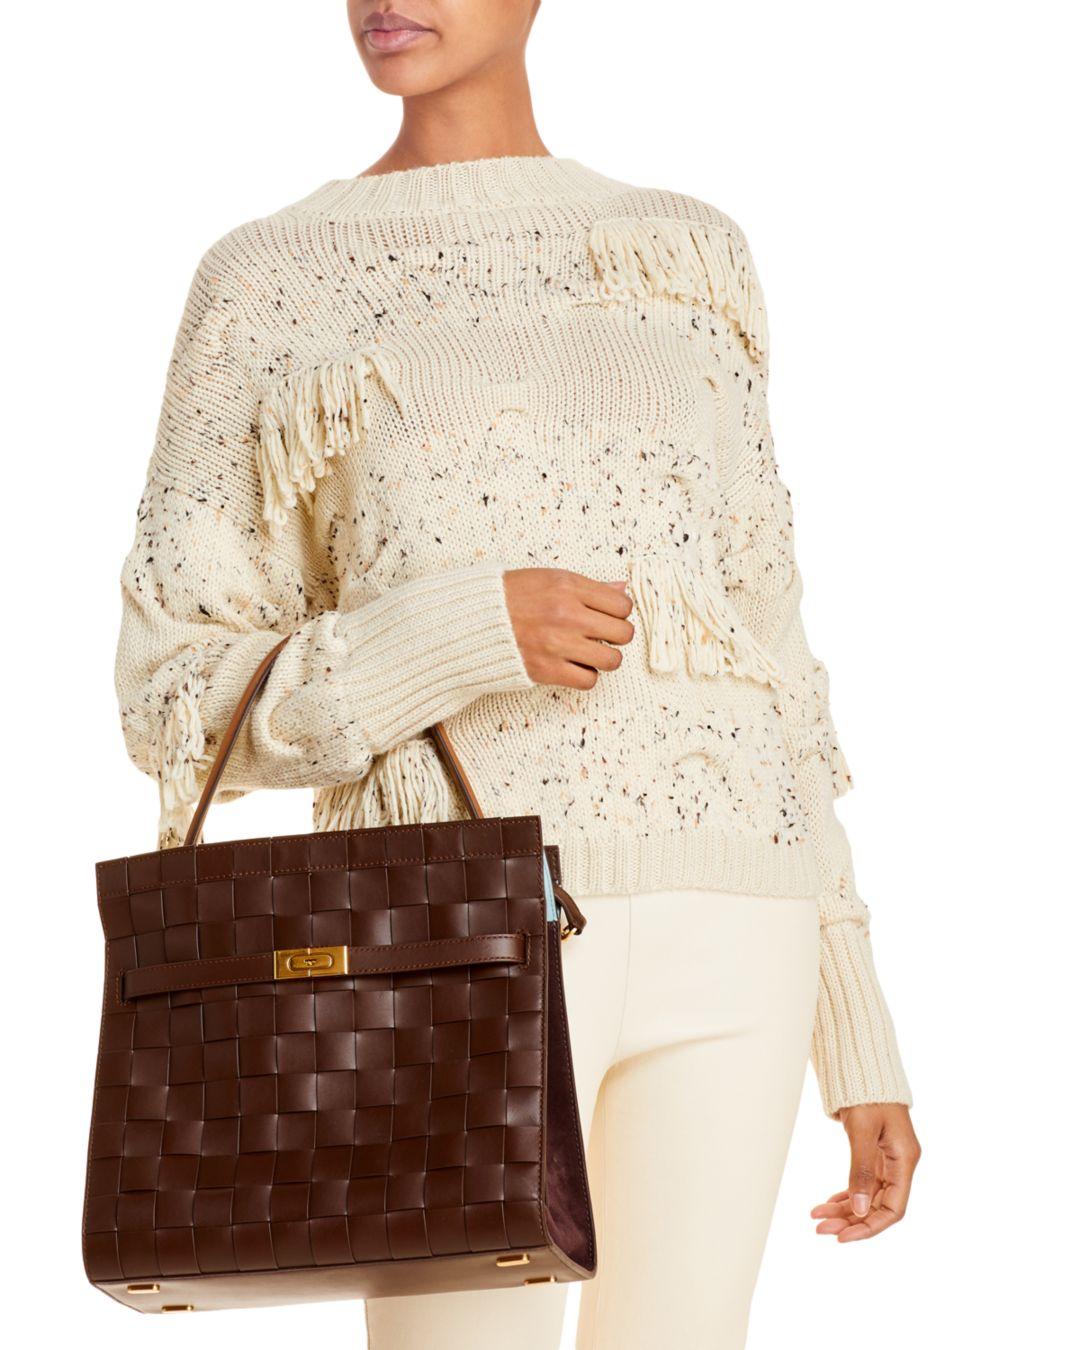 Tory Burch Lee Radziwill Woven Double Bag in Brown | Lyst